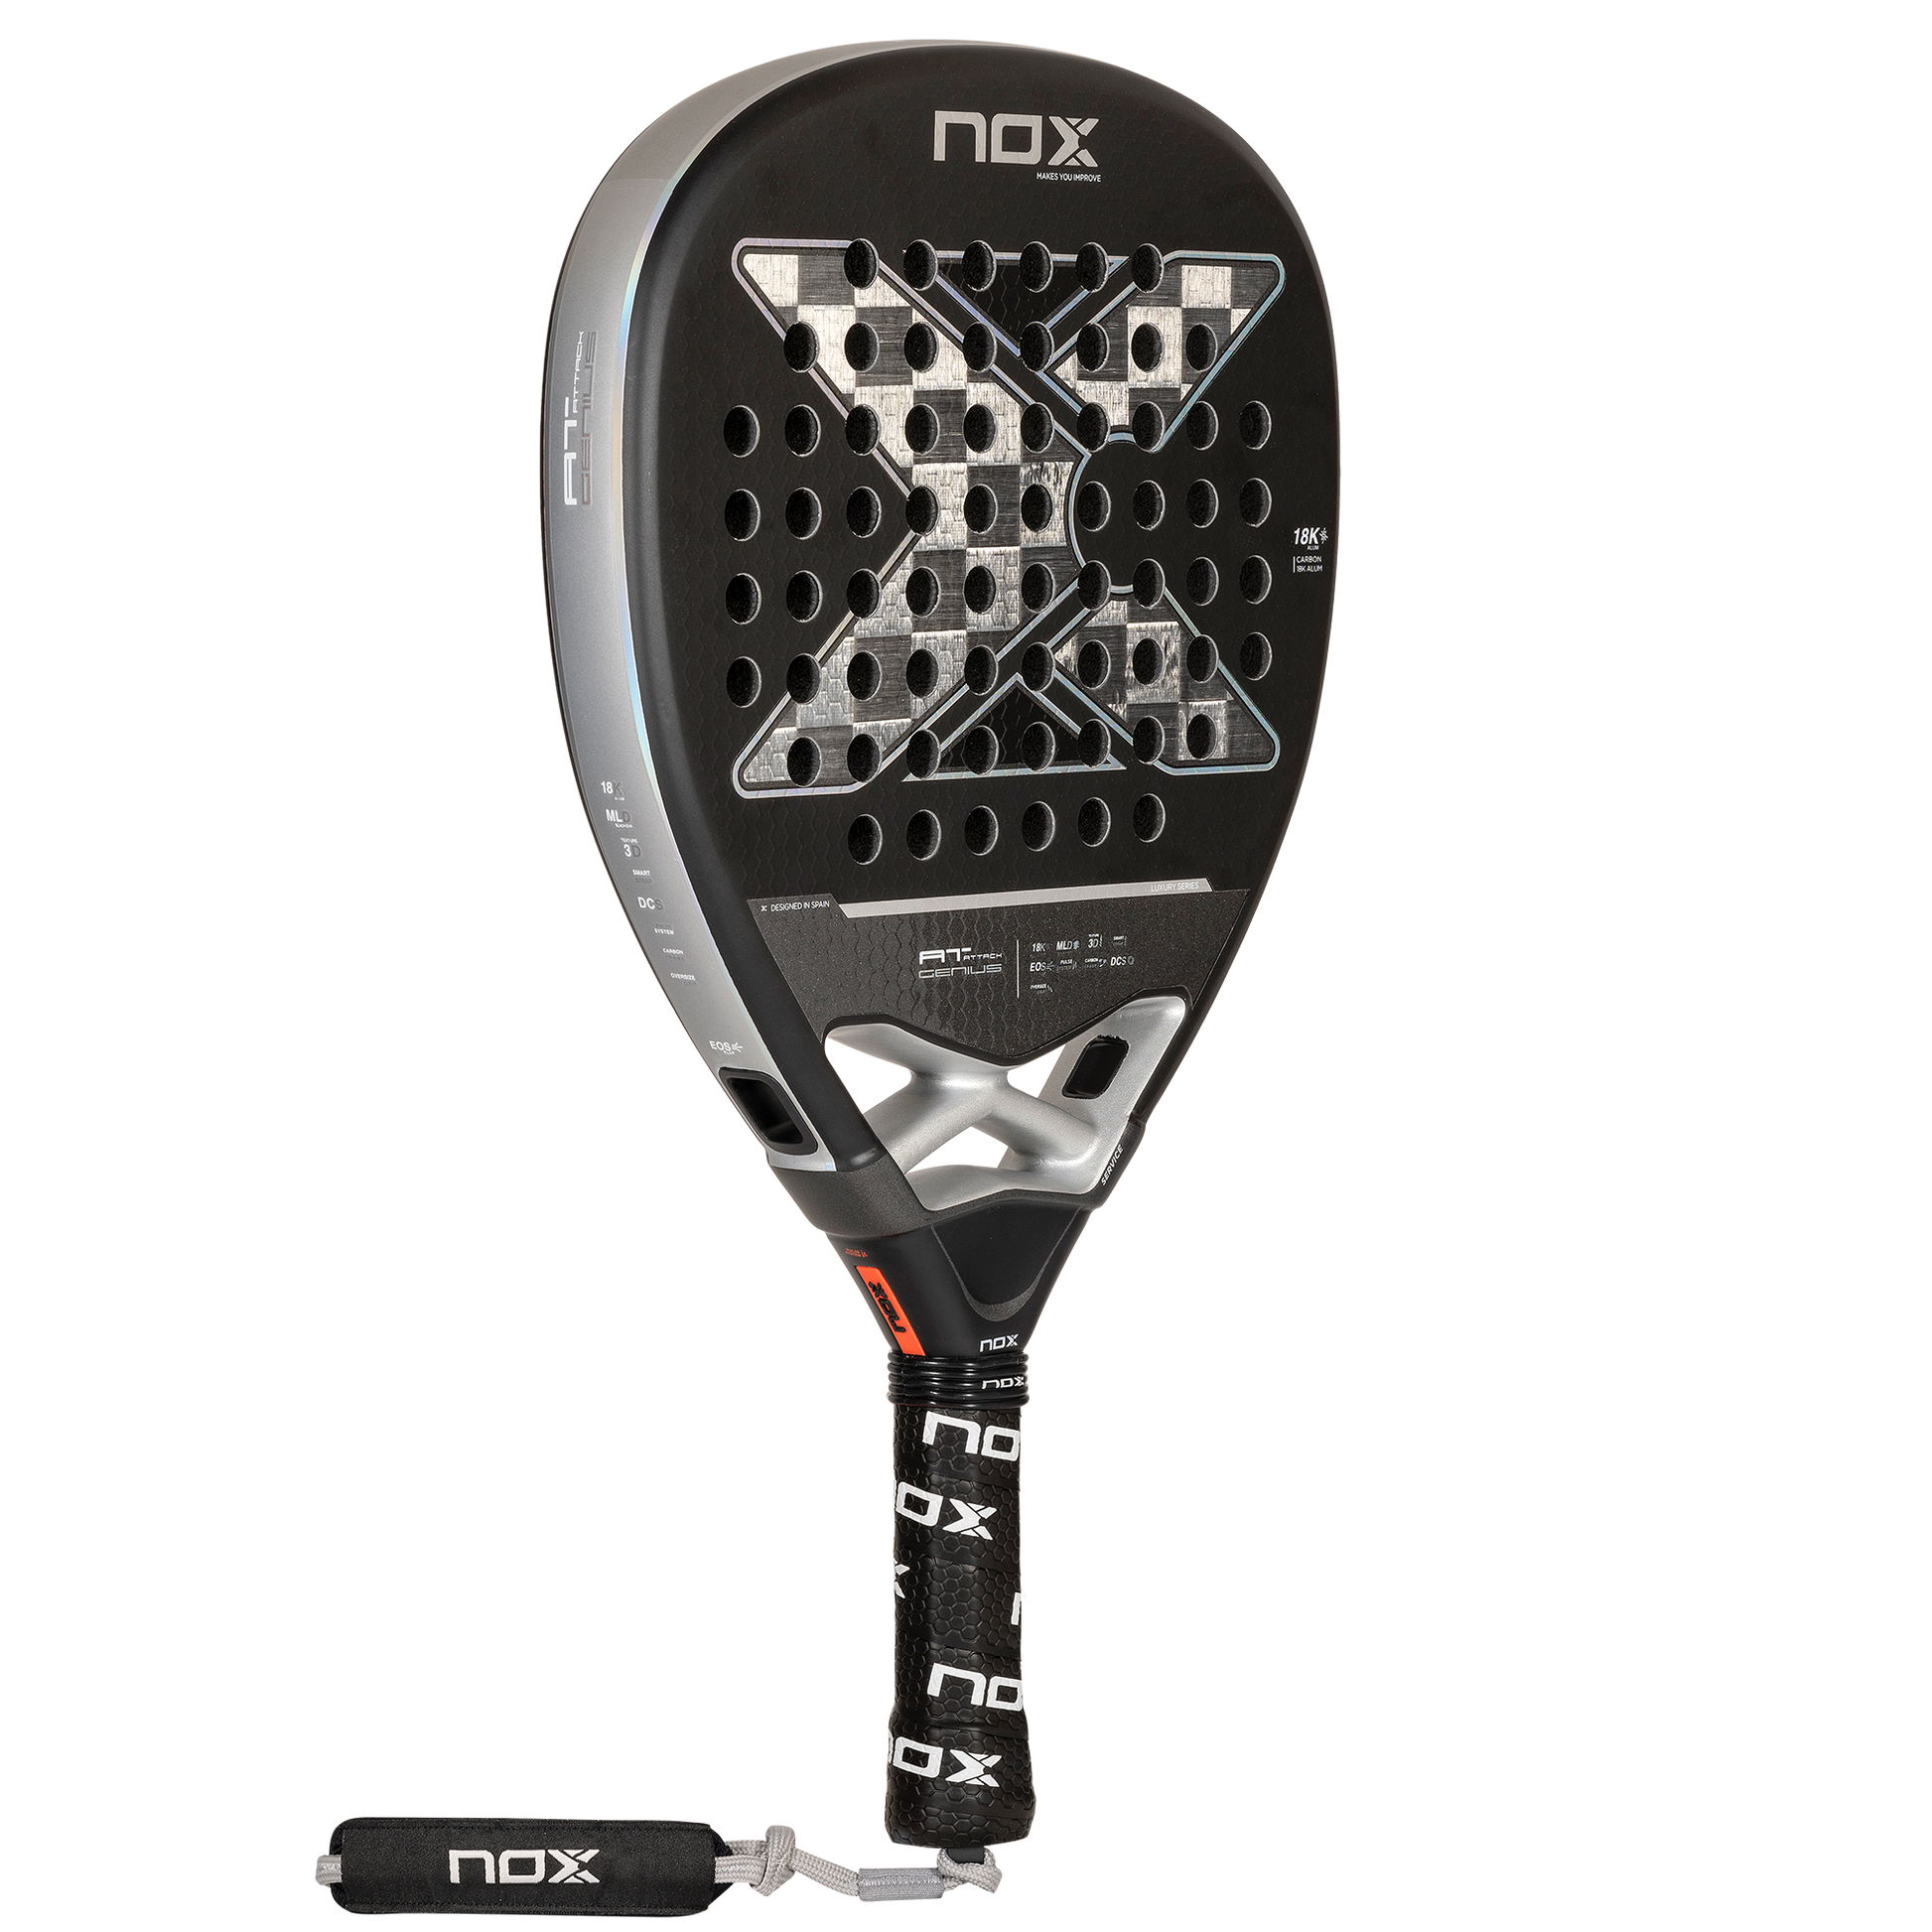 An image without the Custom Grip of the AT Luxury Genius AATTACK 18K padel racket by Agustin Tapia on sale at thepadelshop.co.nz